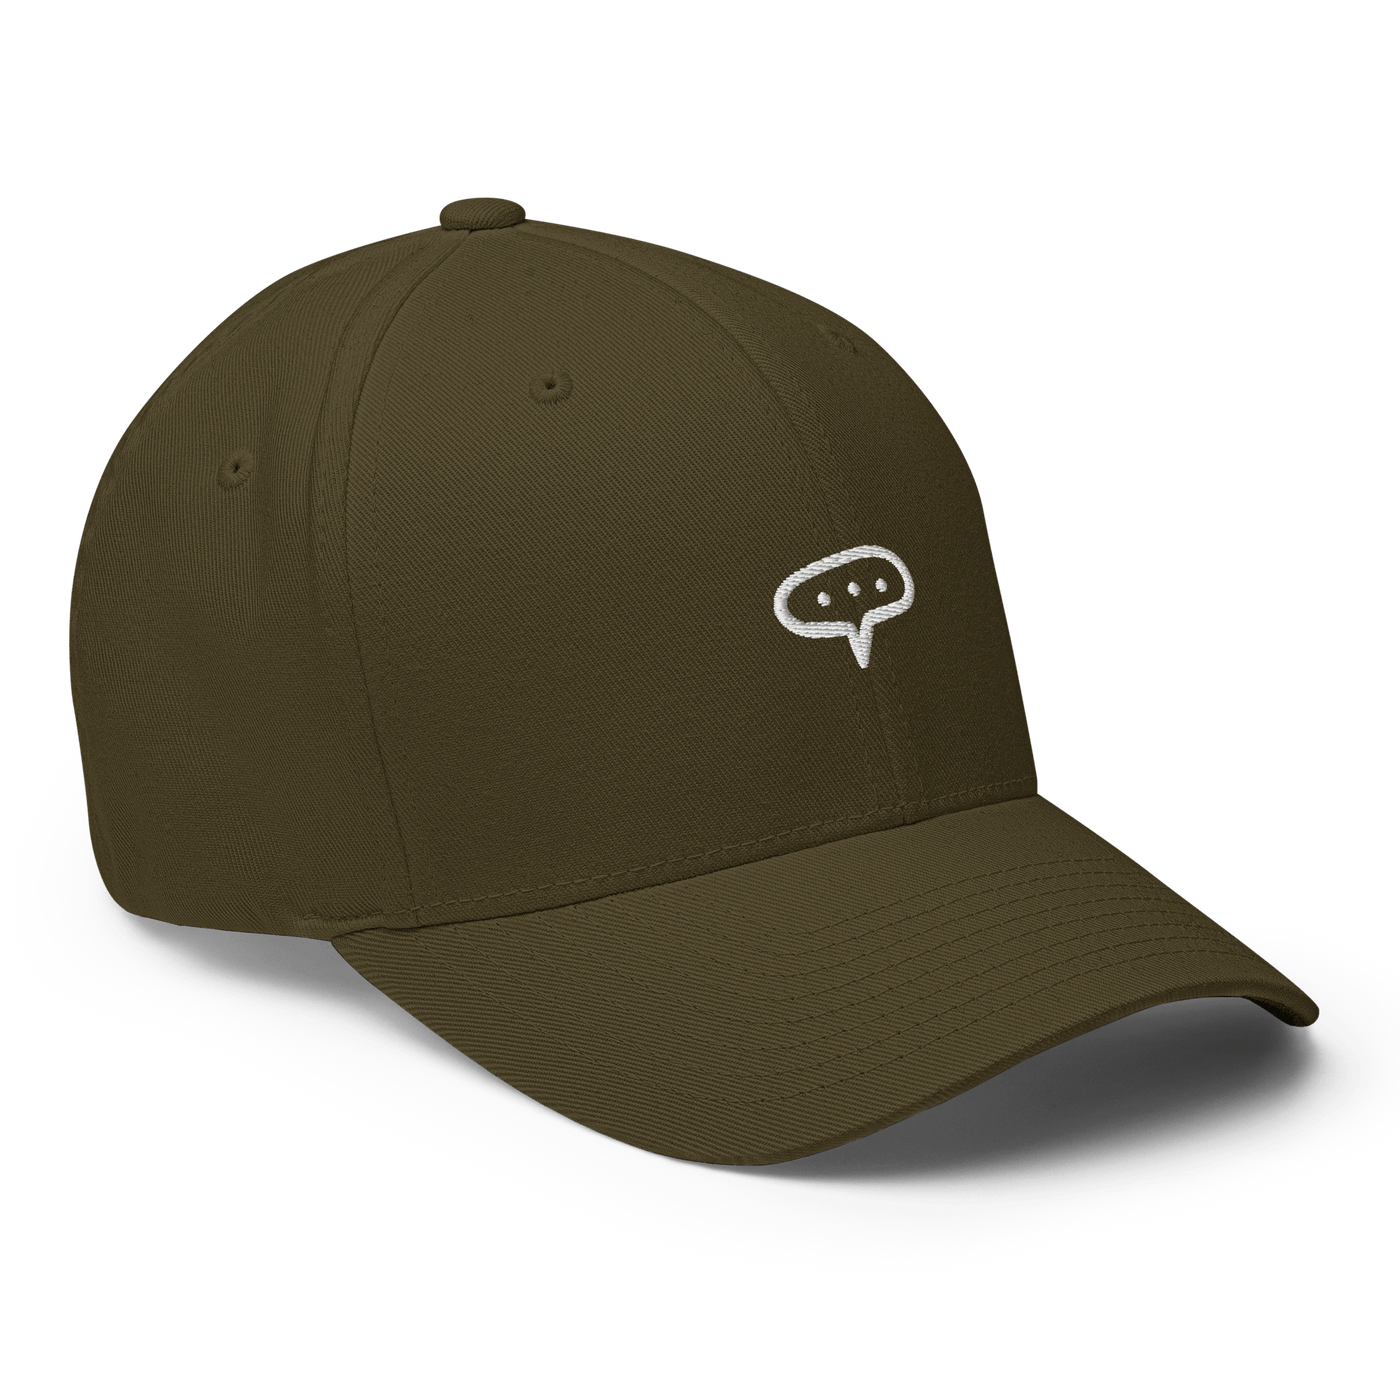 Thinking Flexfit Cap - Olive - S/M - Just Another Cap Store